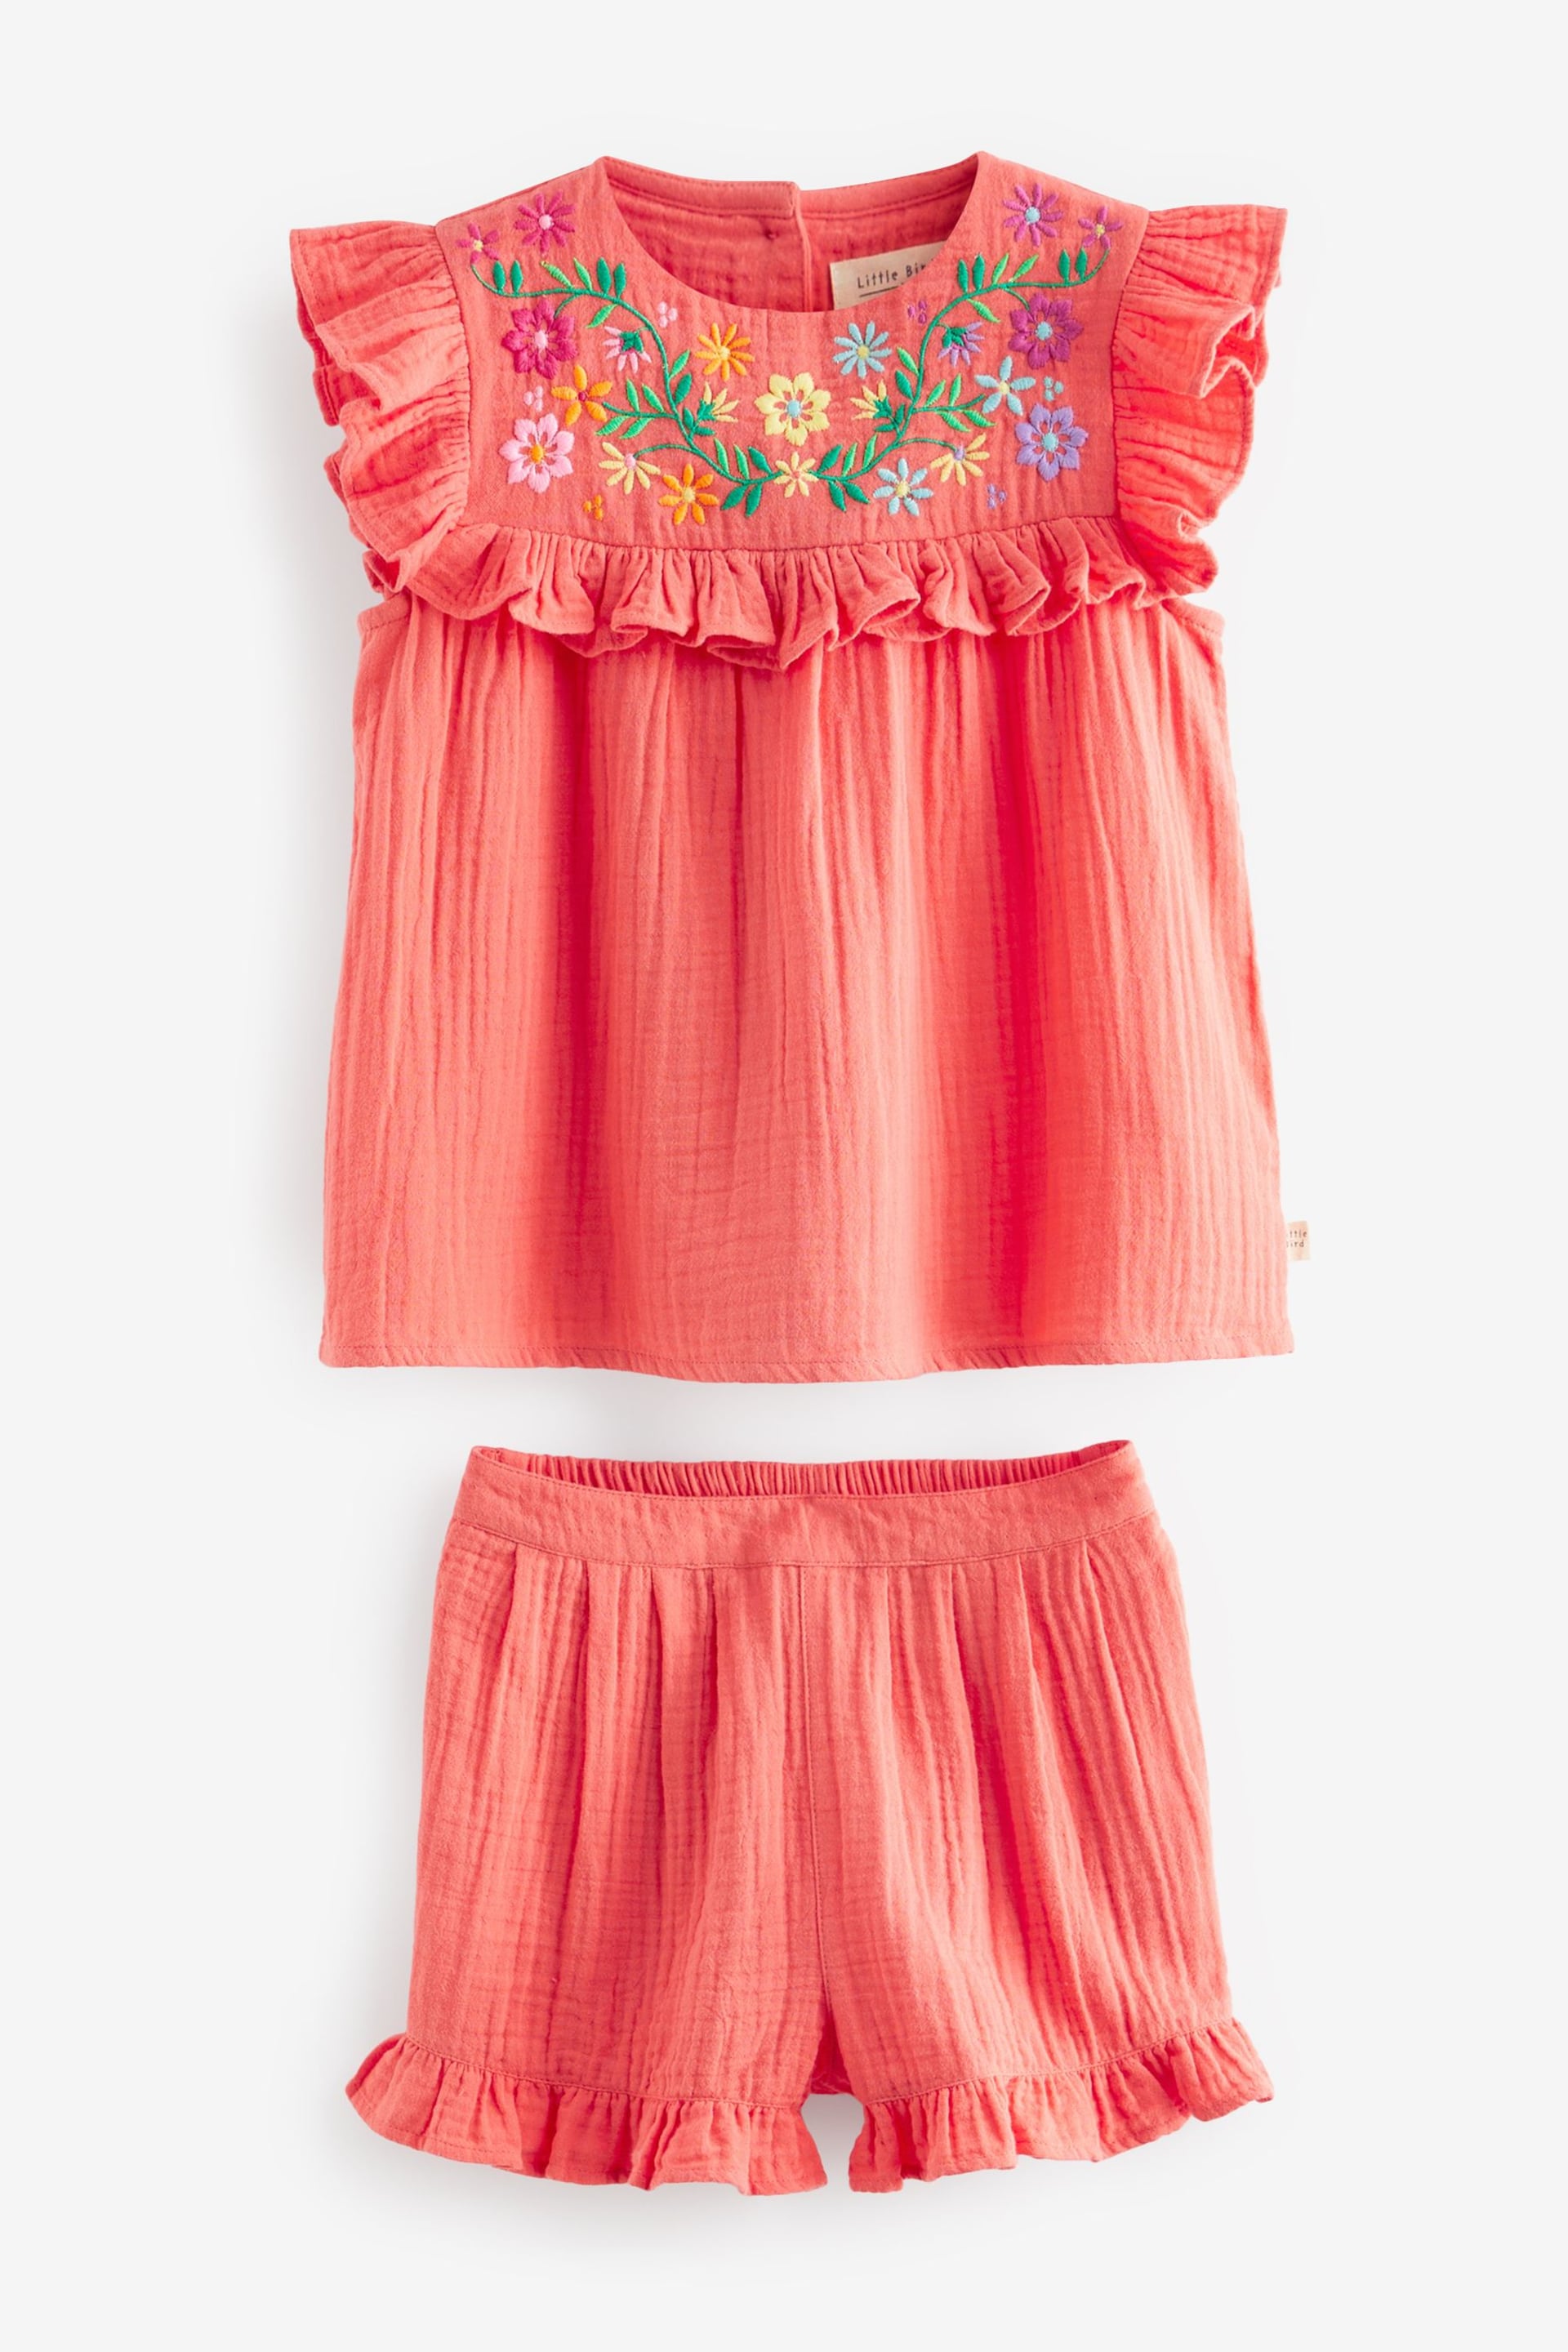 Little Bird by Jools Oliver Pink Floral Embroidered Frill Tank Top and Shorts Set - Image 5 of 8